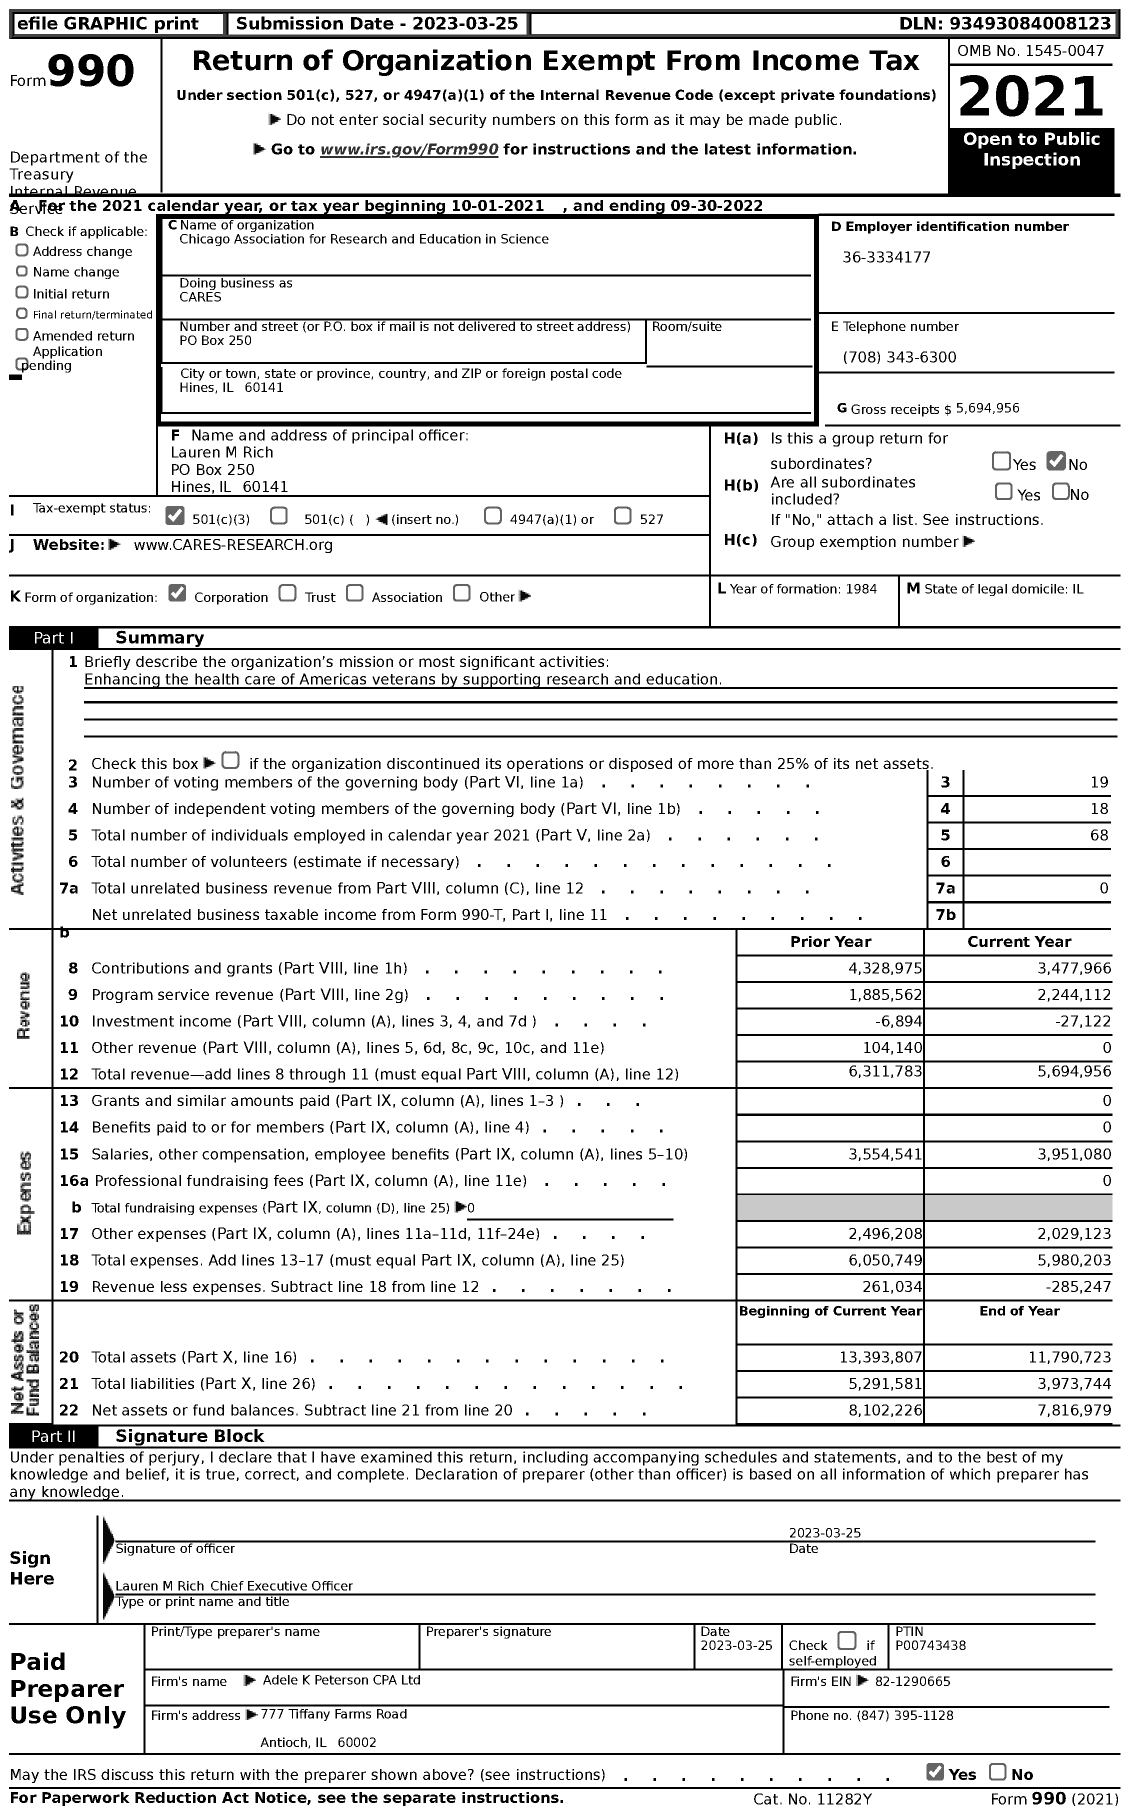 Image of first page of 2021 Form 990 for Chicago Association for Research and Education in Science (CARES)